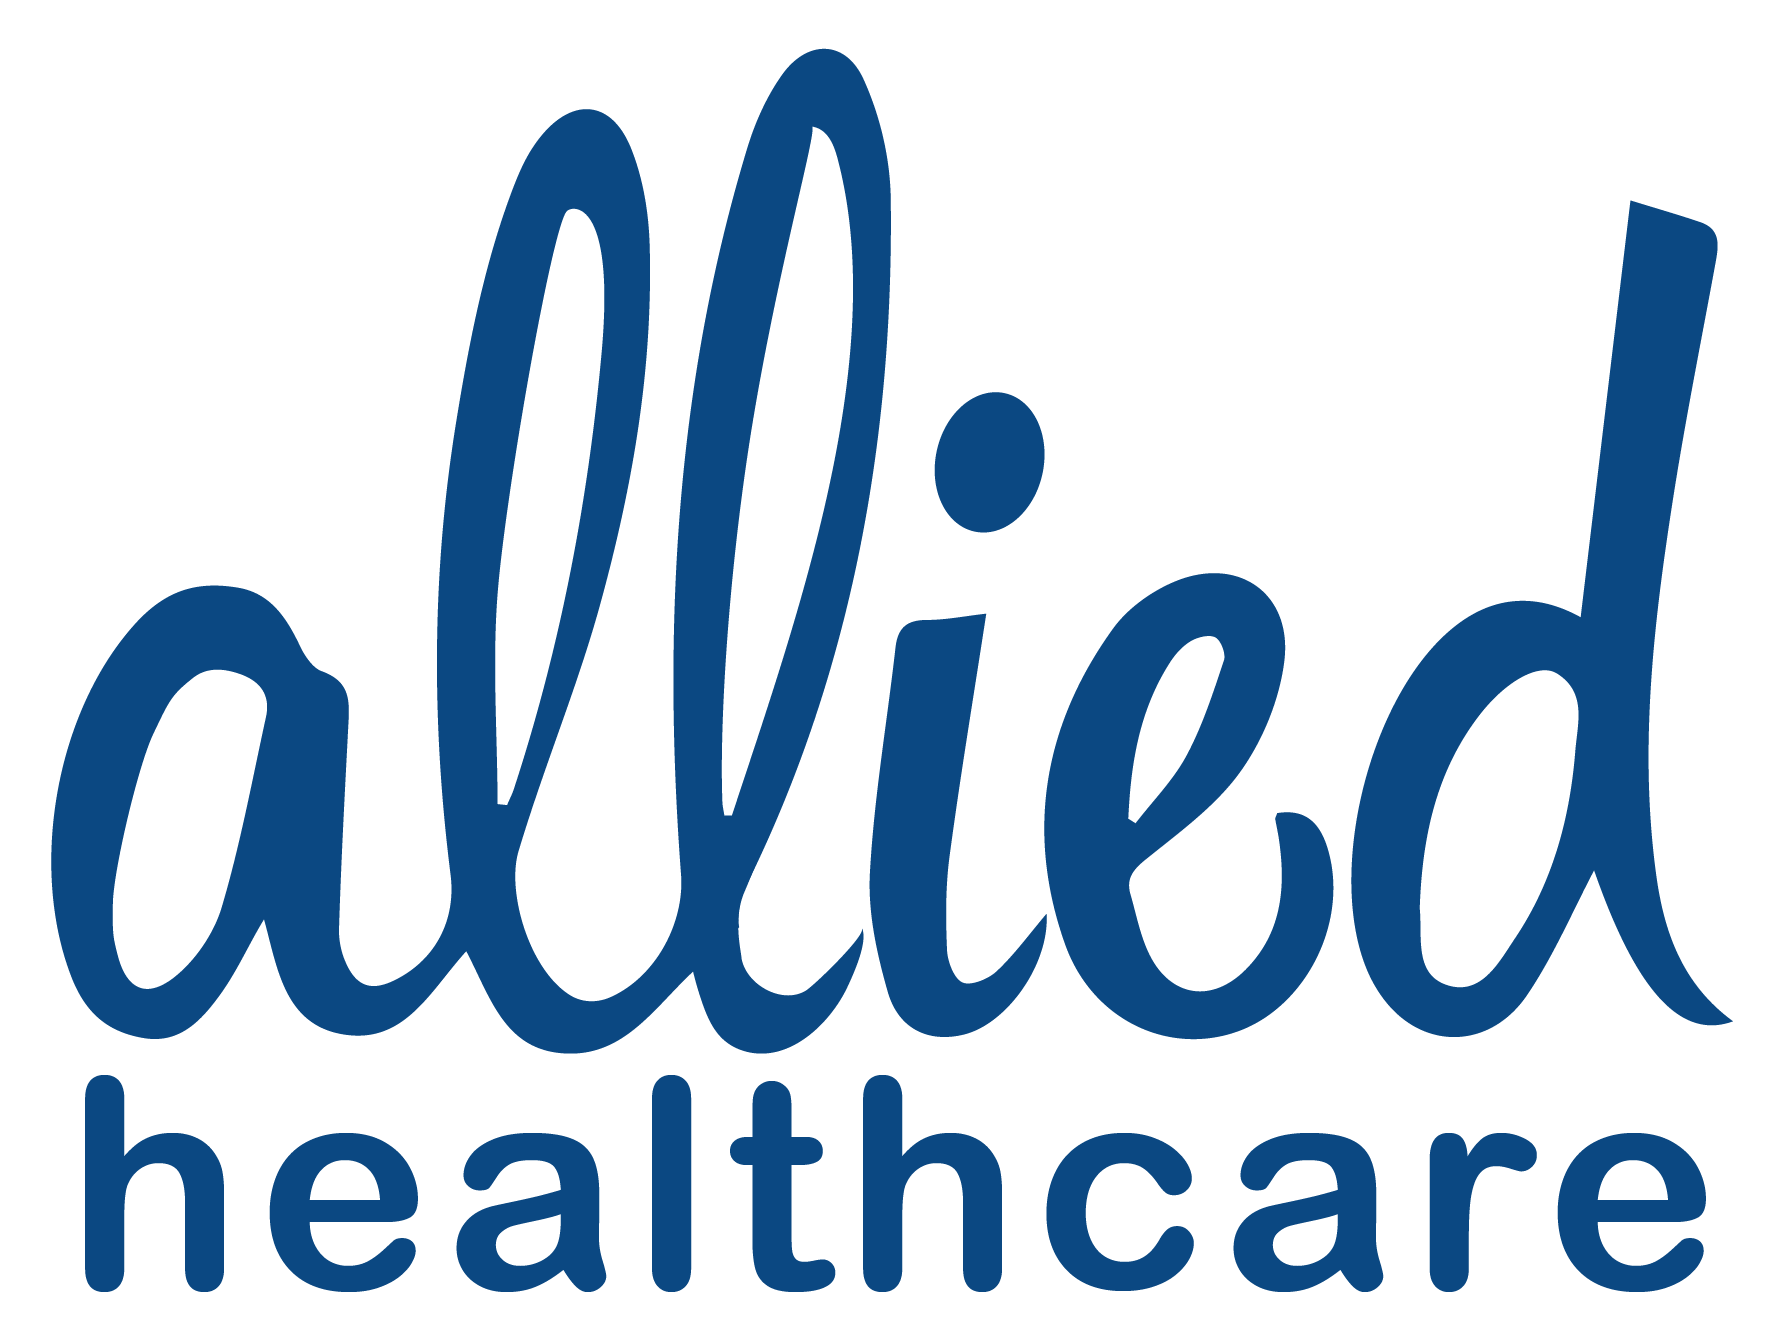 Healthcare Logo - Allied Healthcare | Care and support services to live your life ...